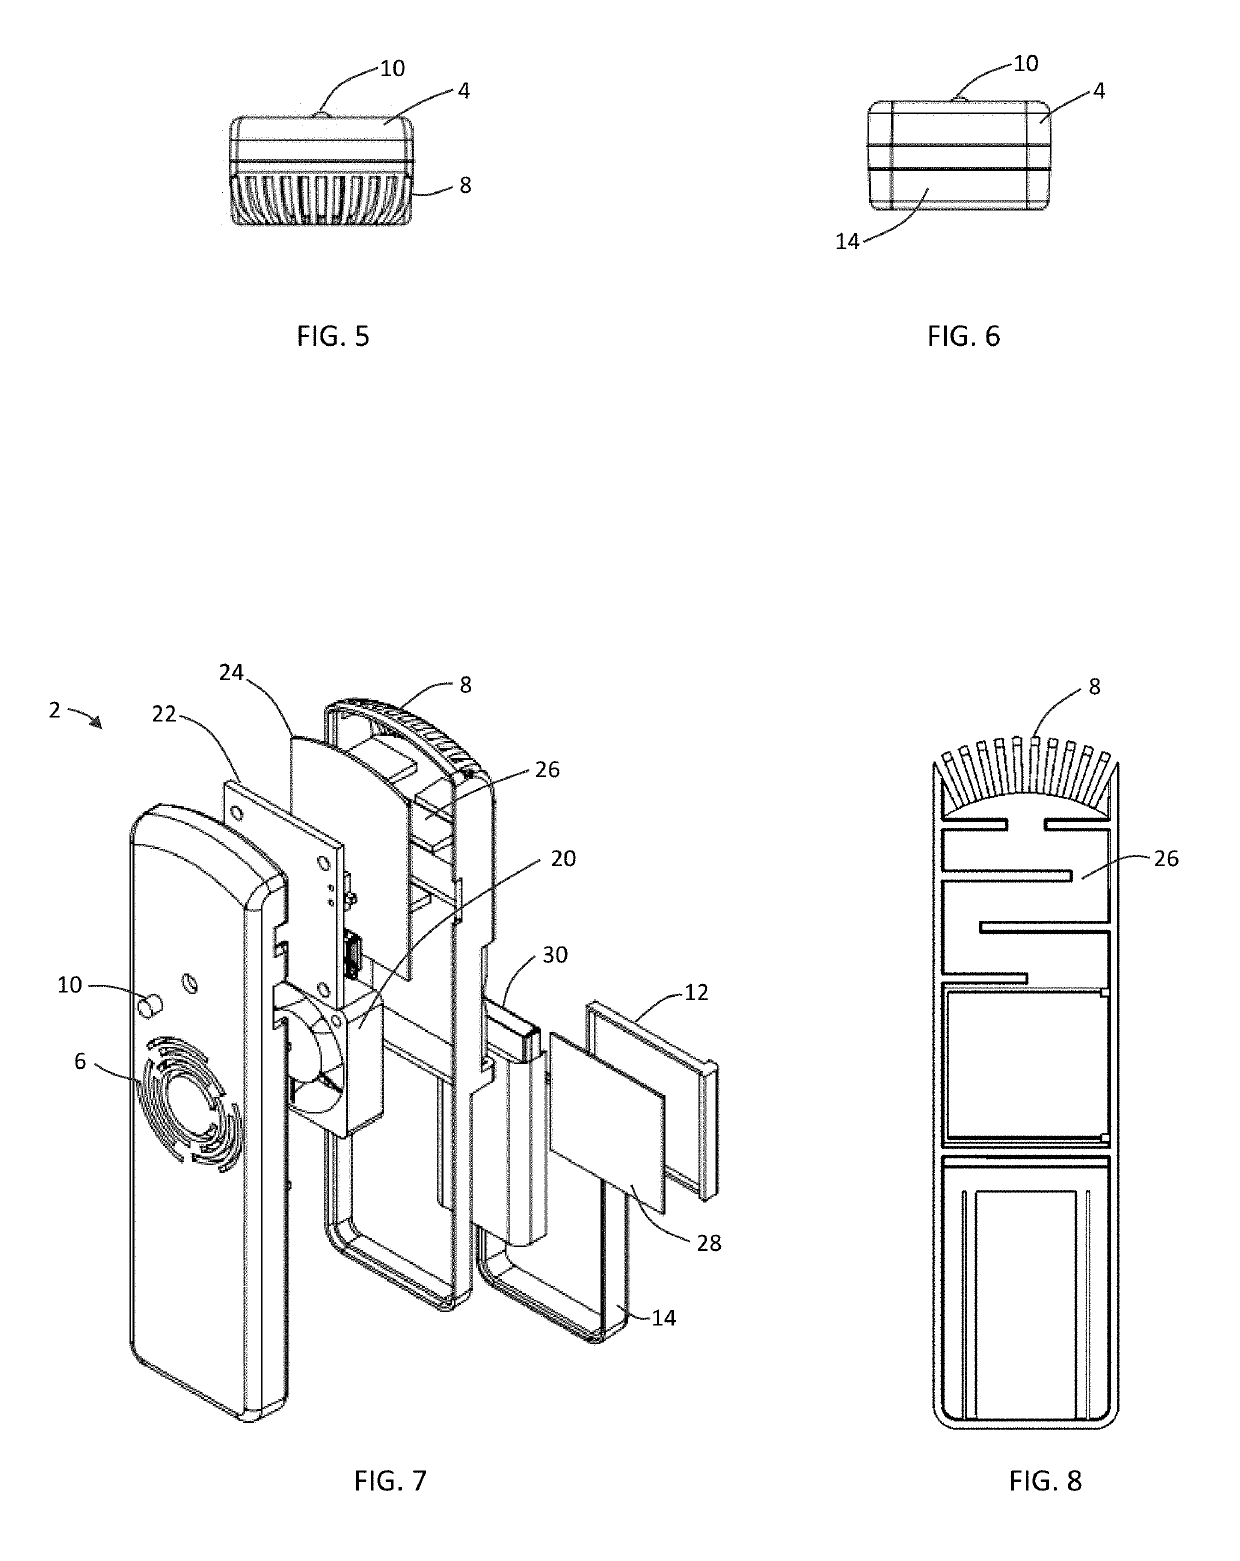 Personal Air Treatment System and Method